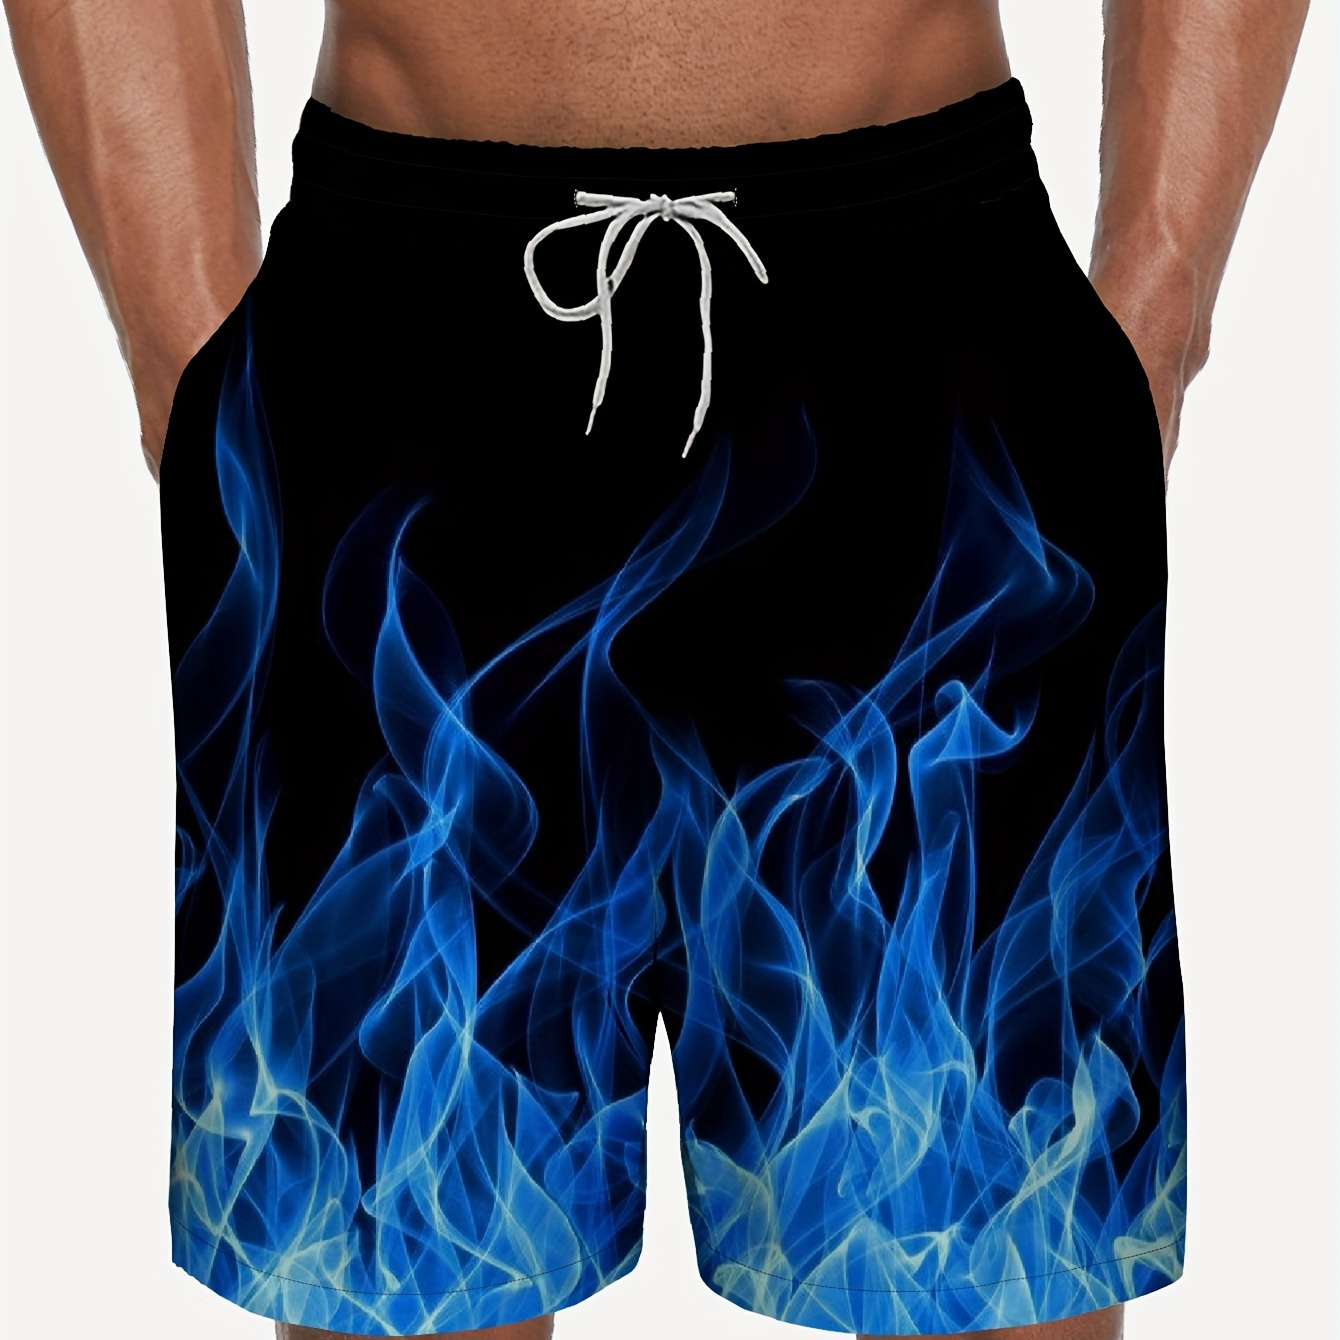 

Flame Graphic Digital Print Men's Fashion Drawstring Summer Shorts With Pockets For Beach Pool Party, Single Layer Shorts Without Mesh Lining